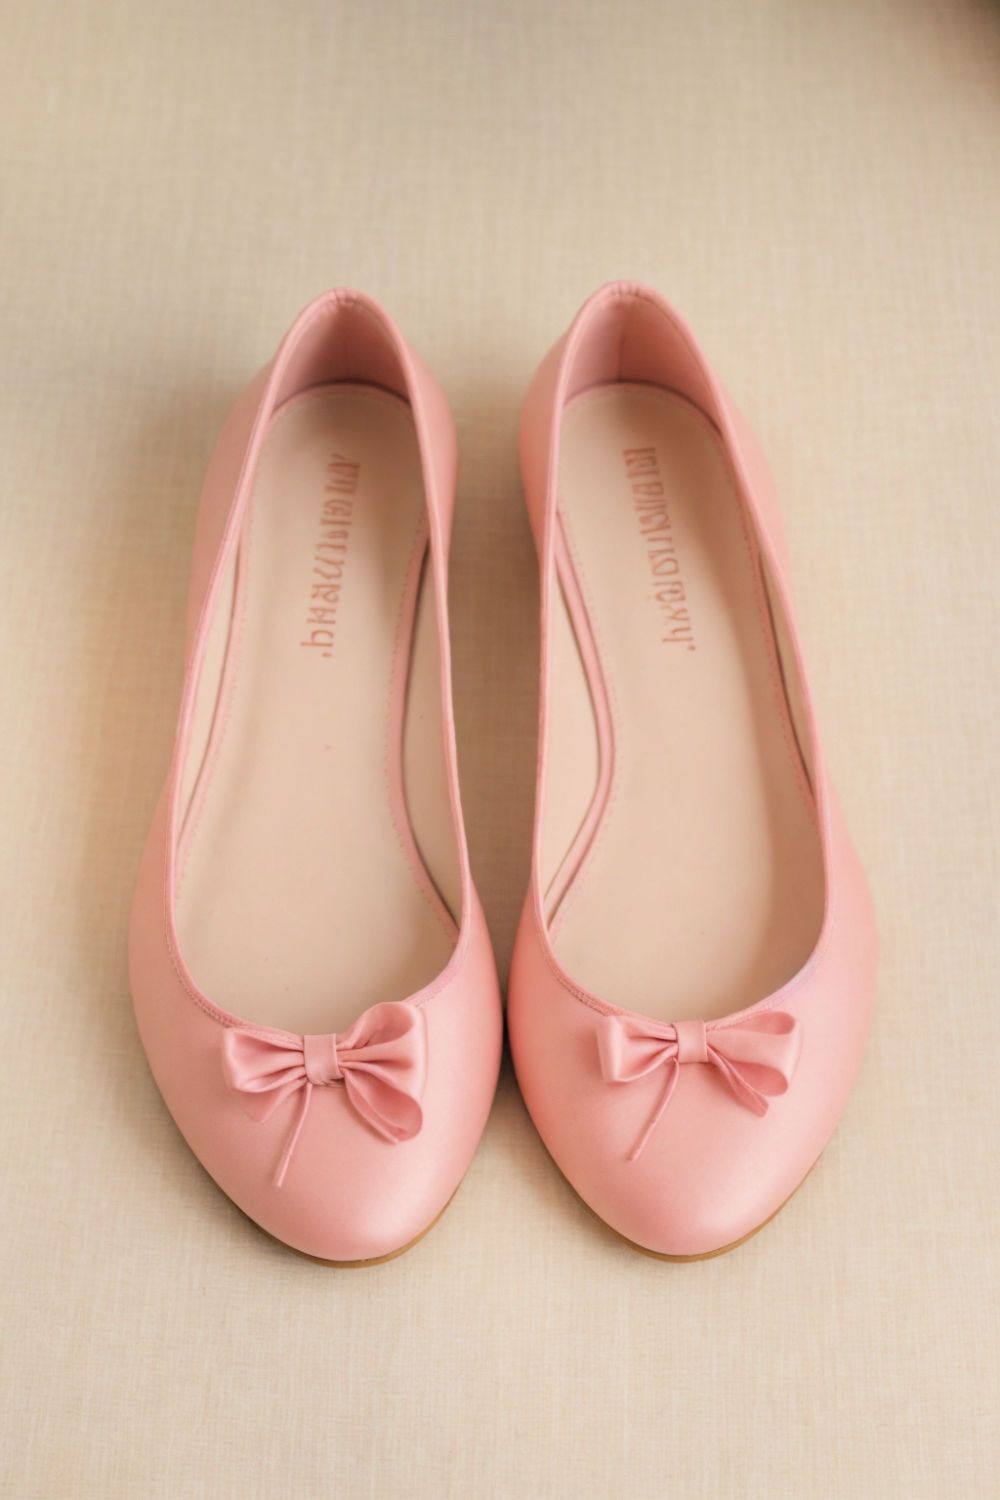 80s style ballet flats with ribbons